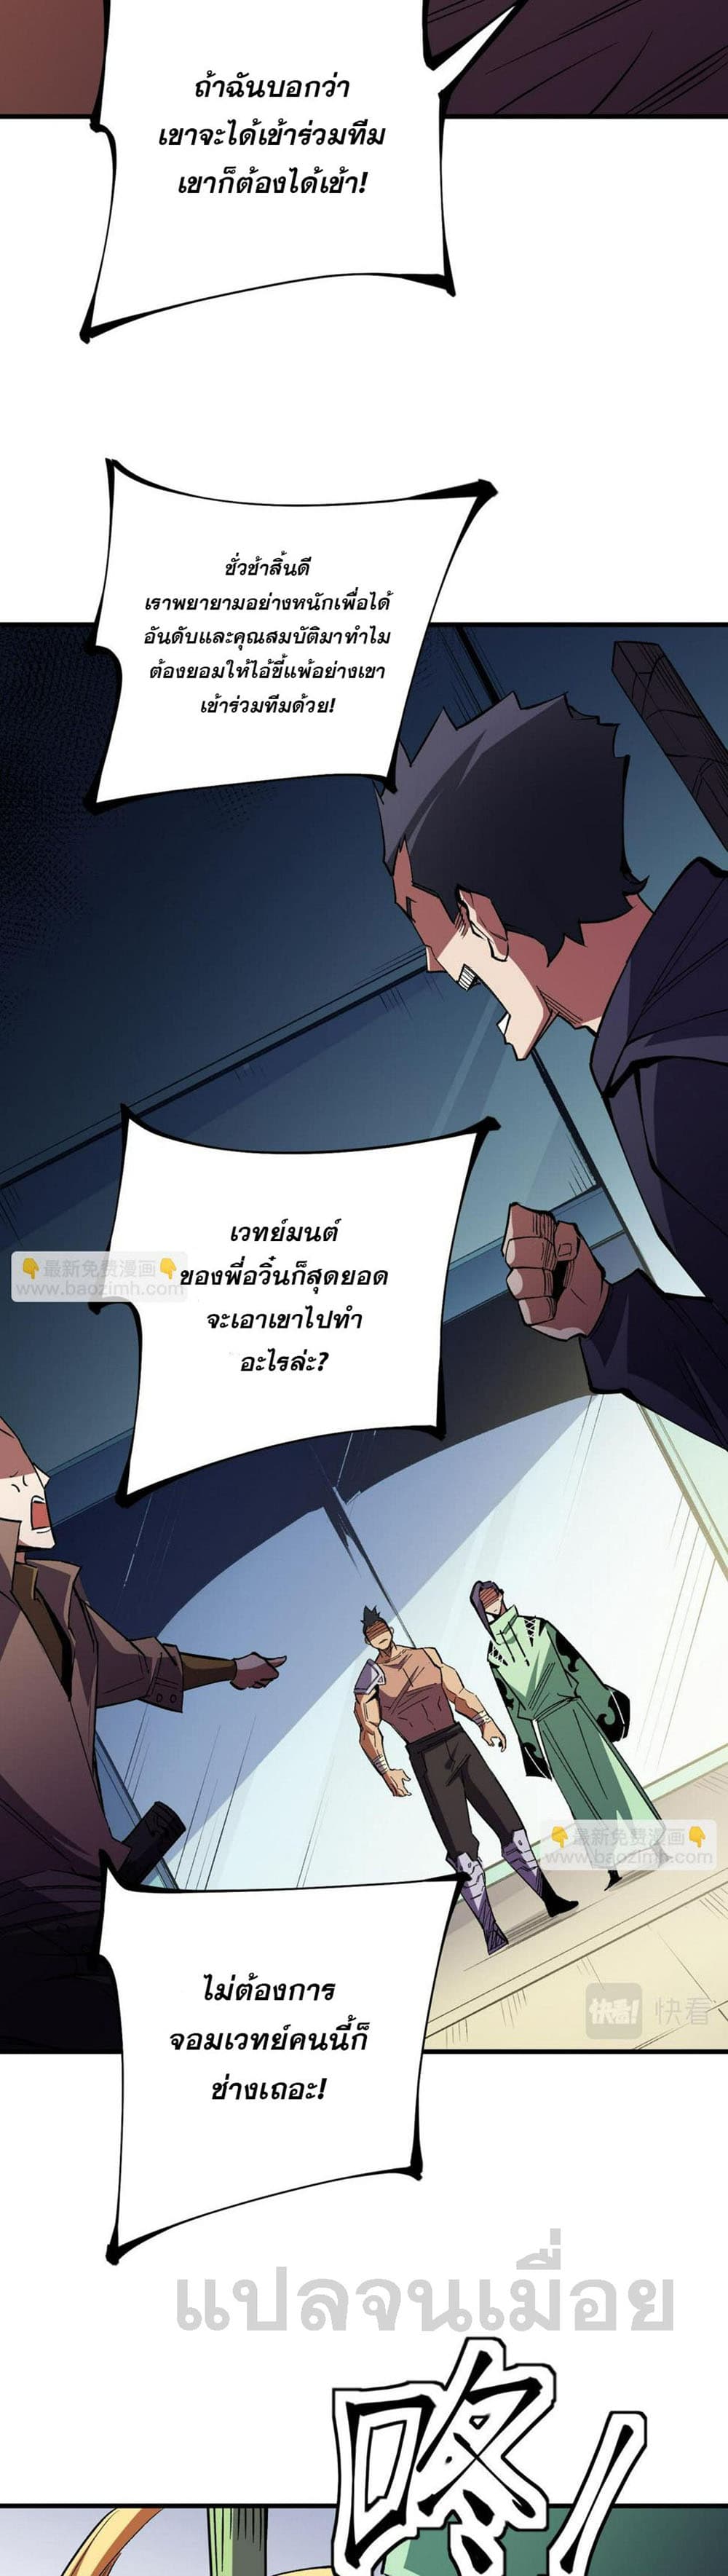 Job Changing for the Entire Population: The Jobless Me Will Terminate the Gods ฉันคือผู้เล่นไร้อาชีพที่สังหารเหล่าเทพ 24-24